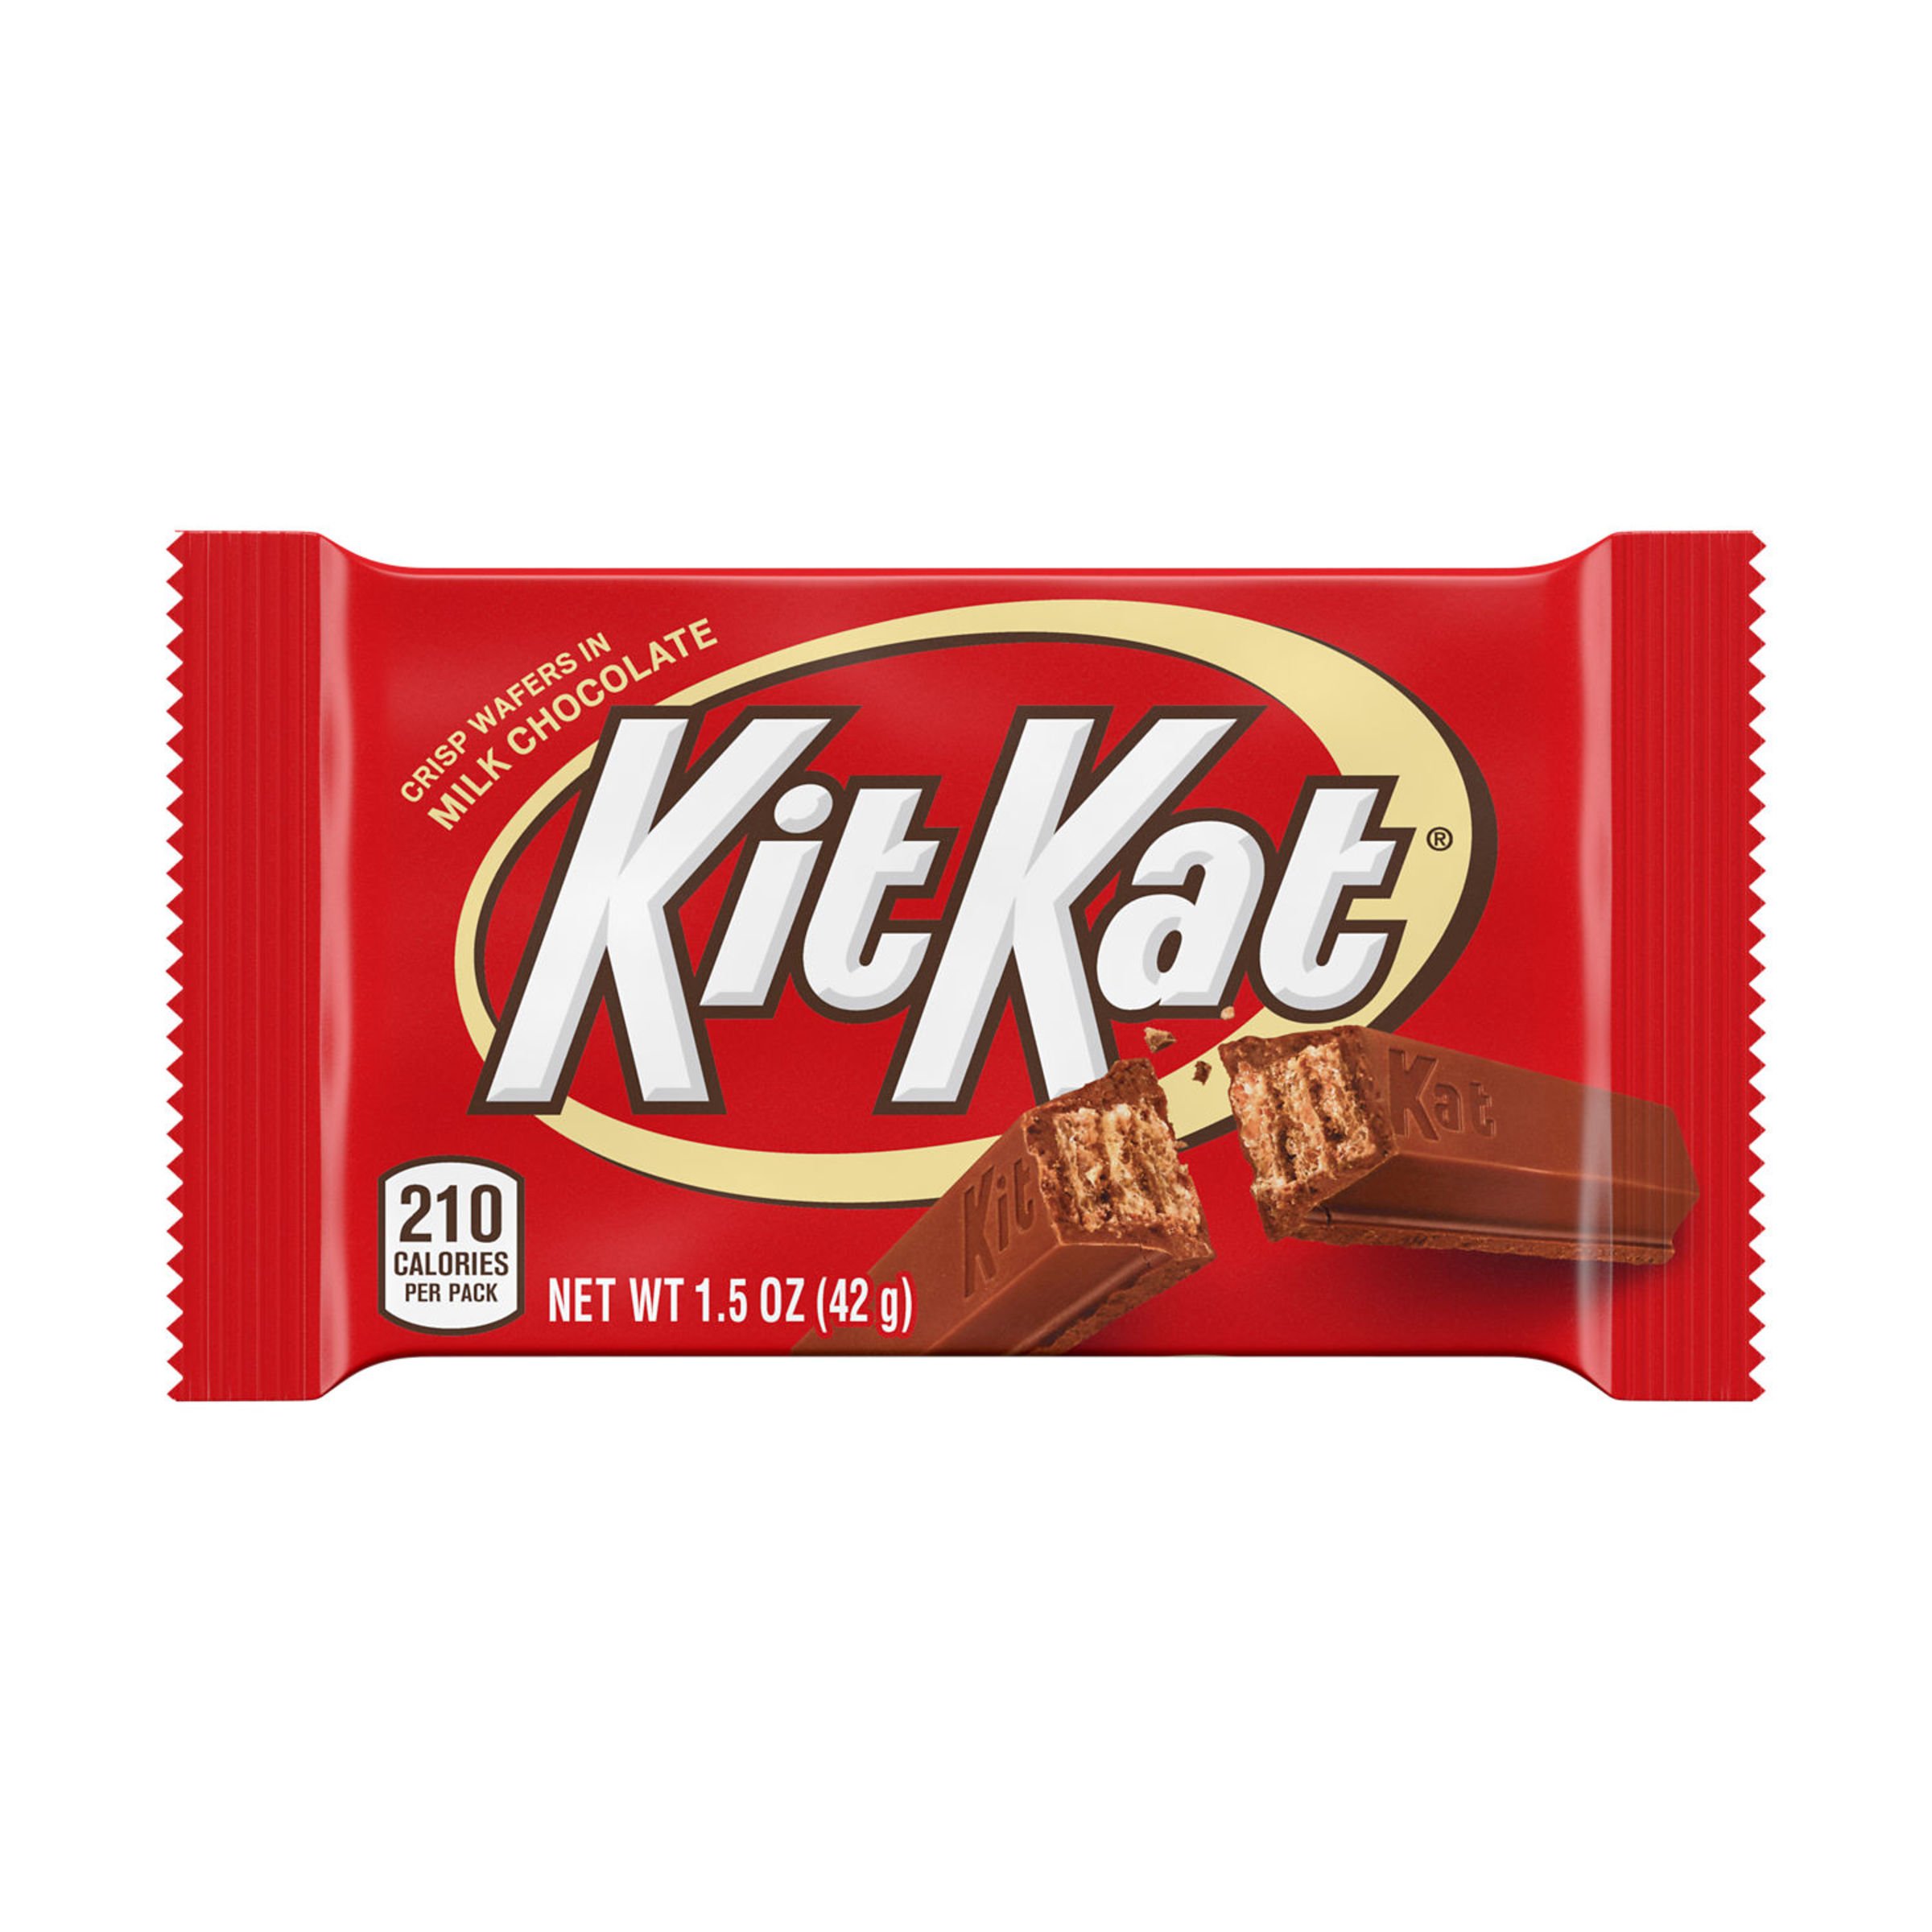 how many calories are in a kit kat bar